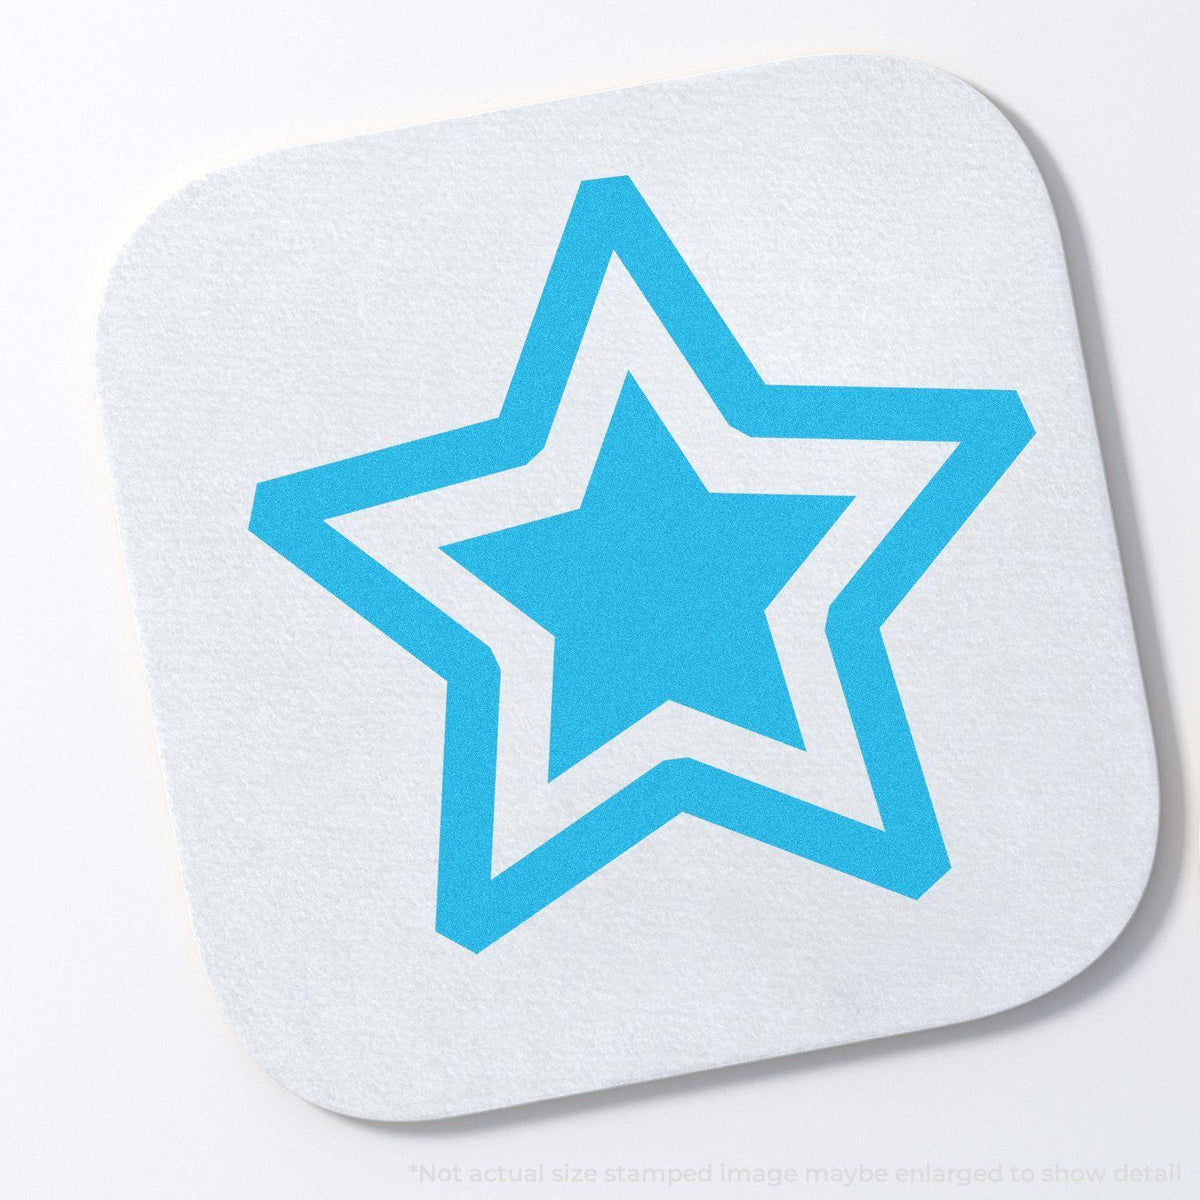 In Use Photo of Round Blue Star Xstamper Stamp